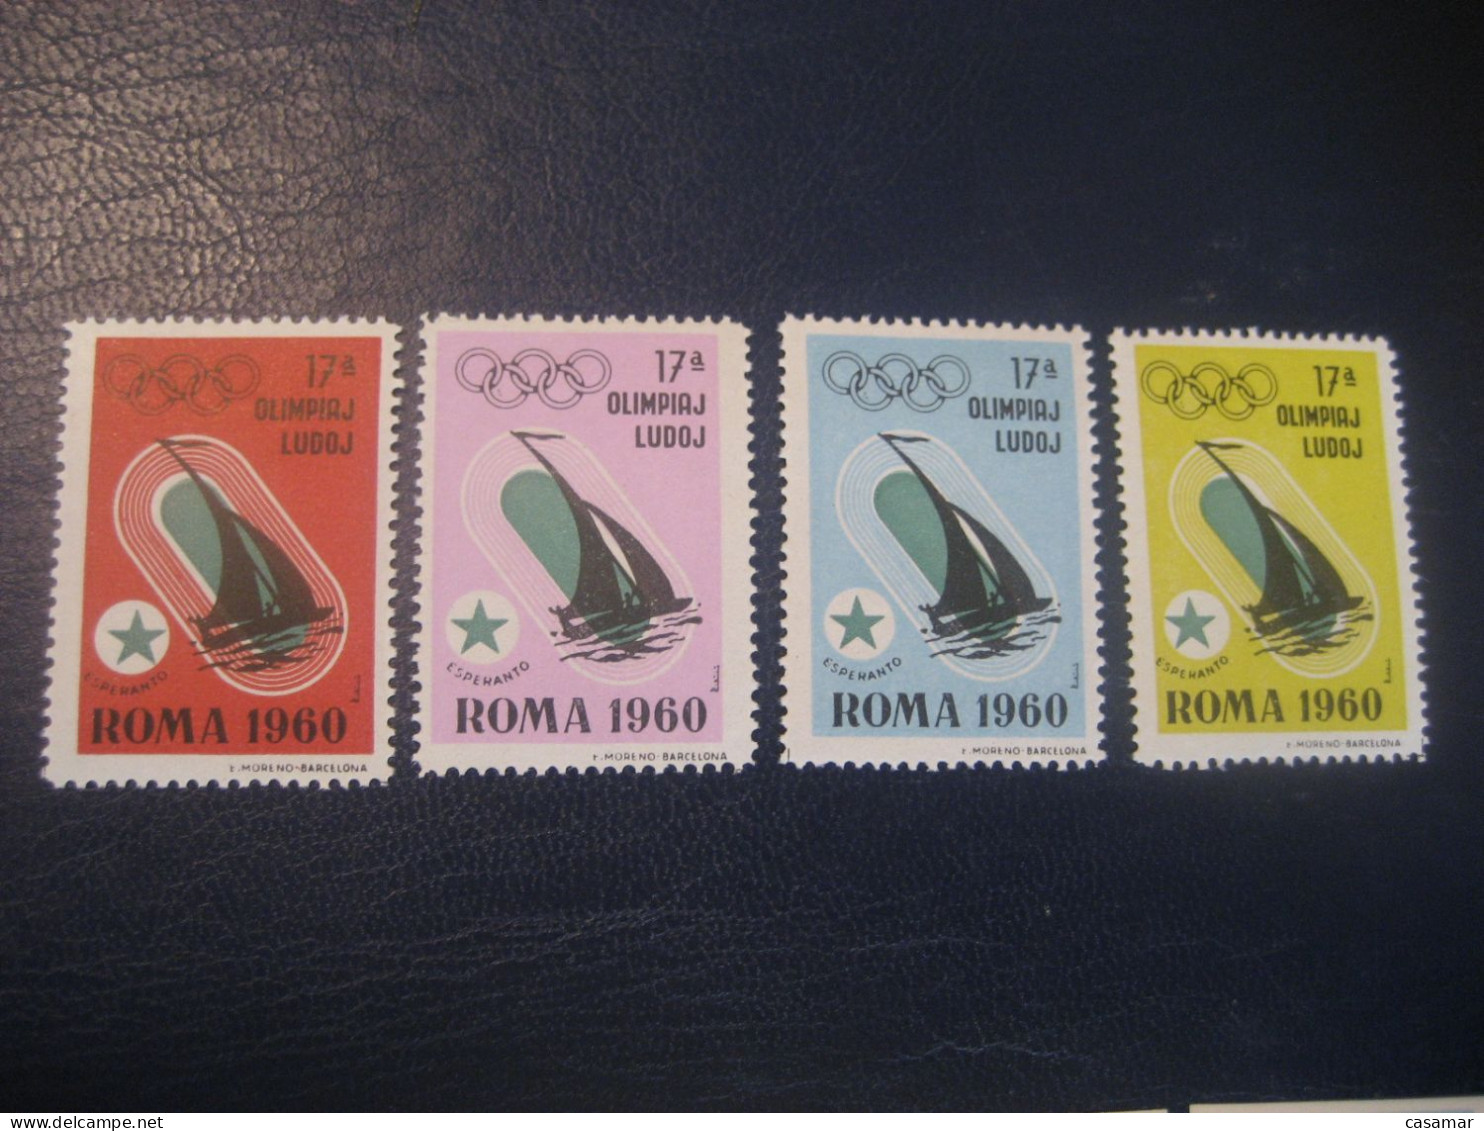 ROMA 1960 Sailing Voile Olympic Games Olympics Esperanto 4 Poster Stamp Vignette ITALY Spain Label - Segeln